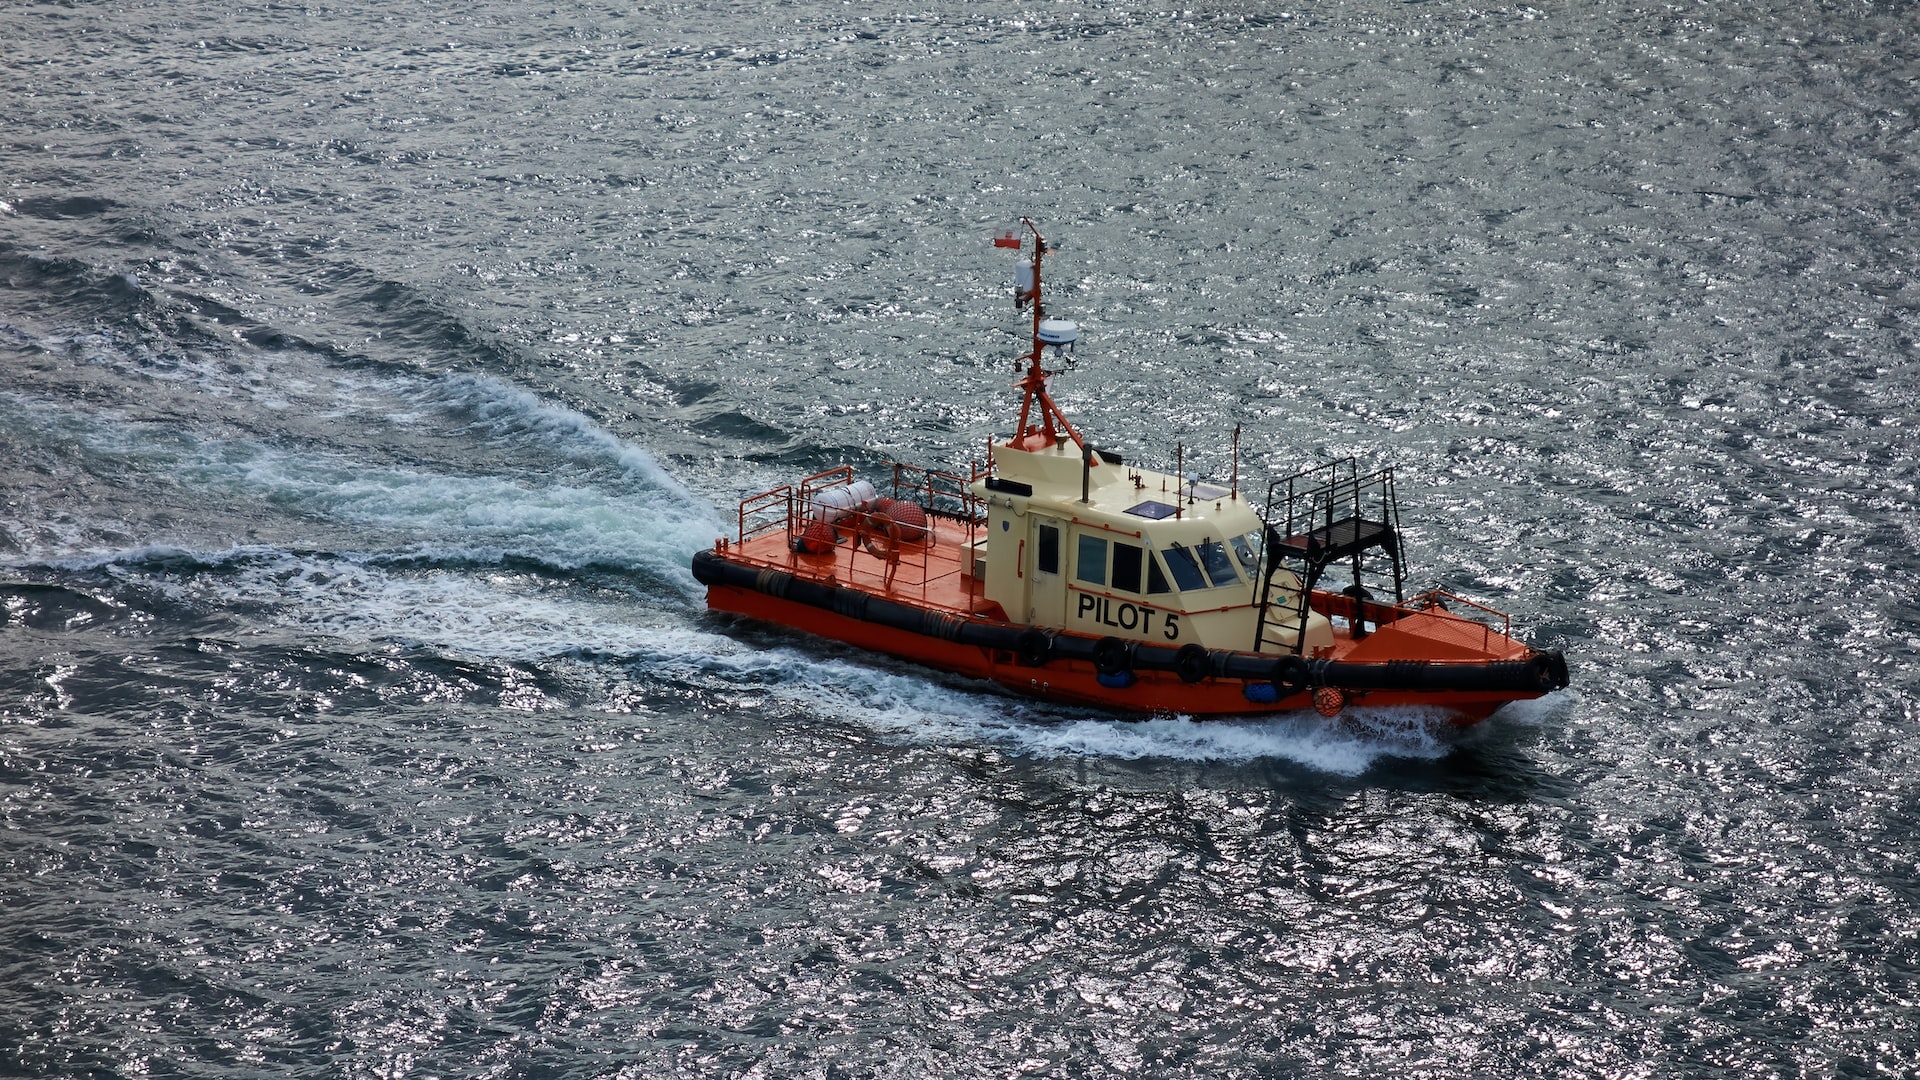 a pilot boat at work